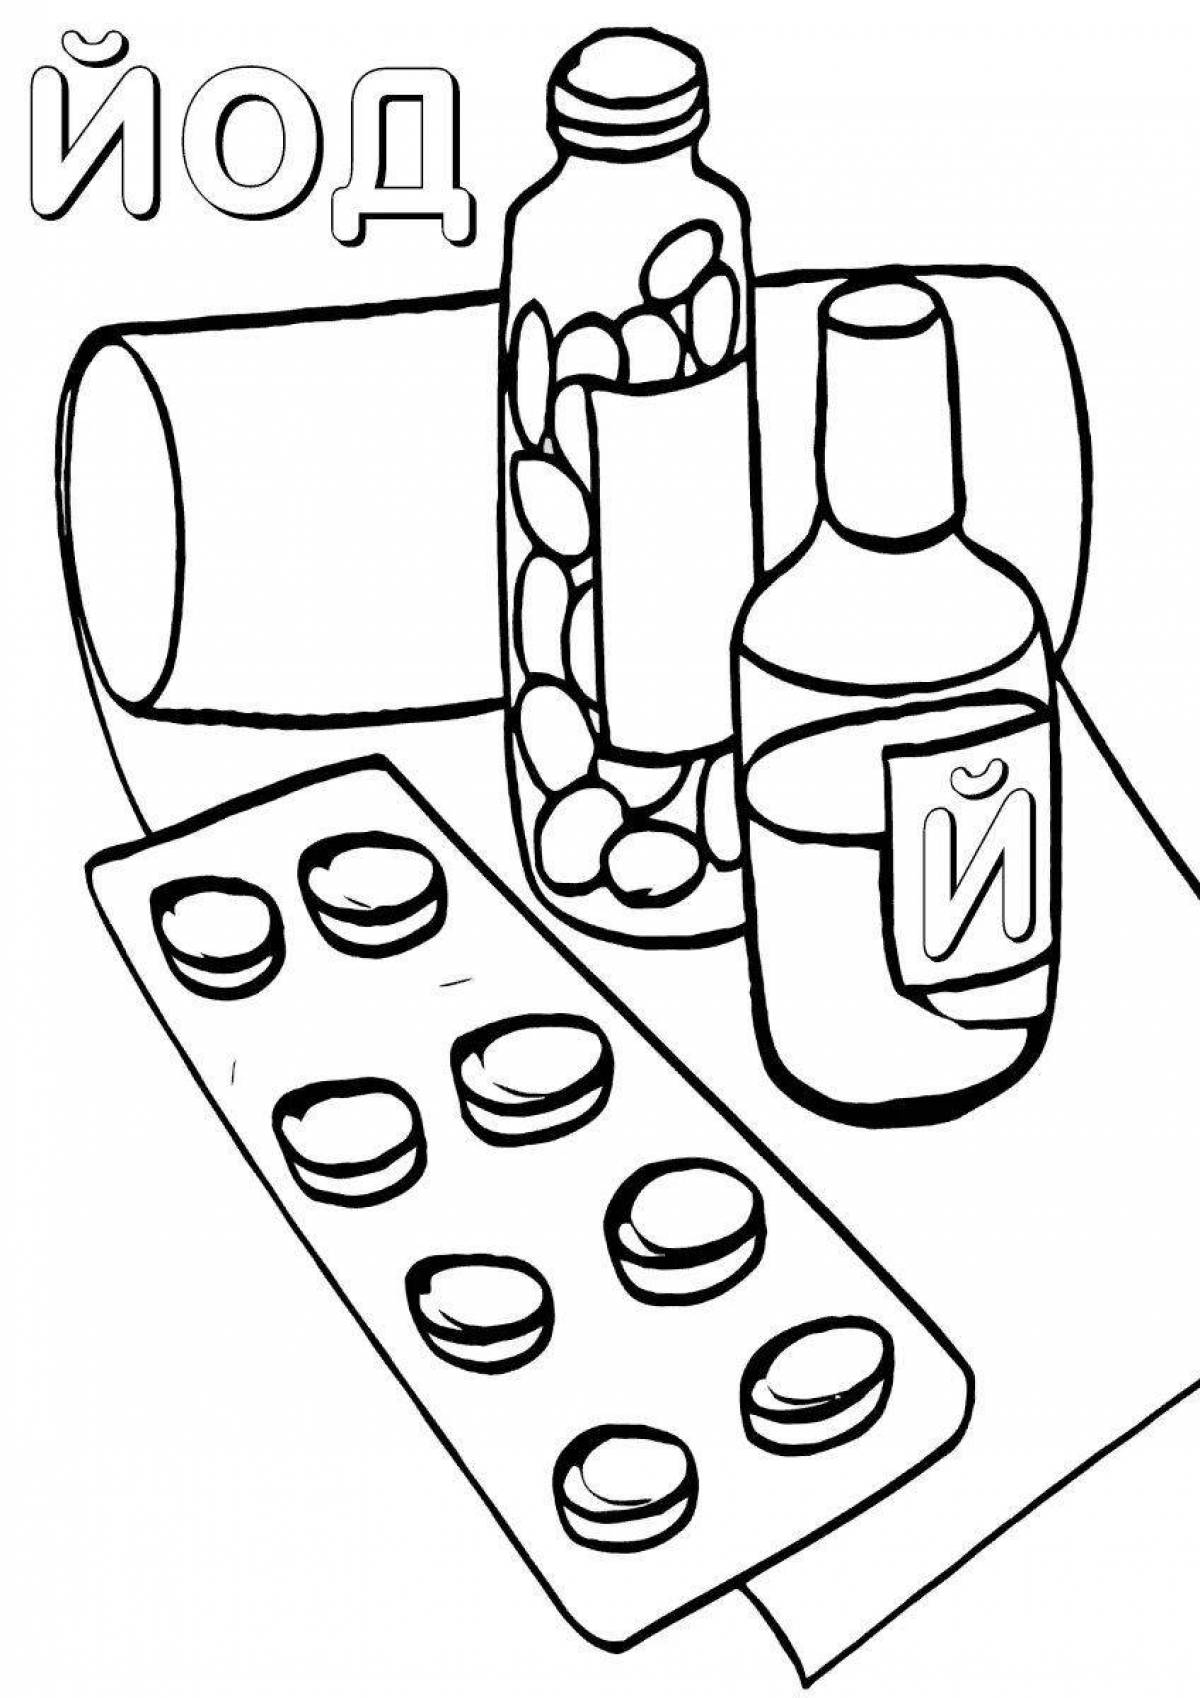 Creative drugs coloring book